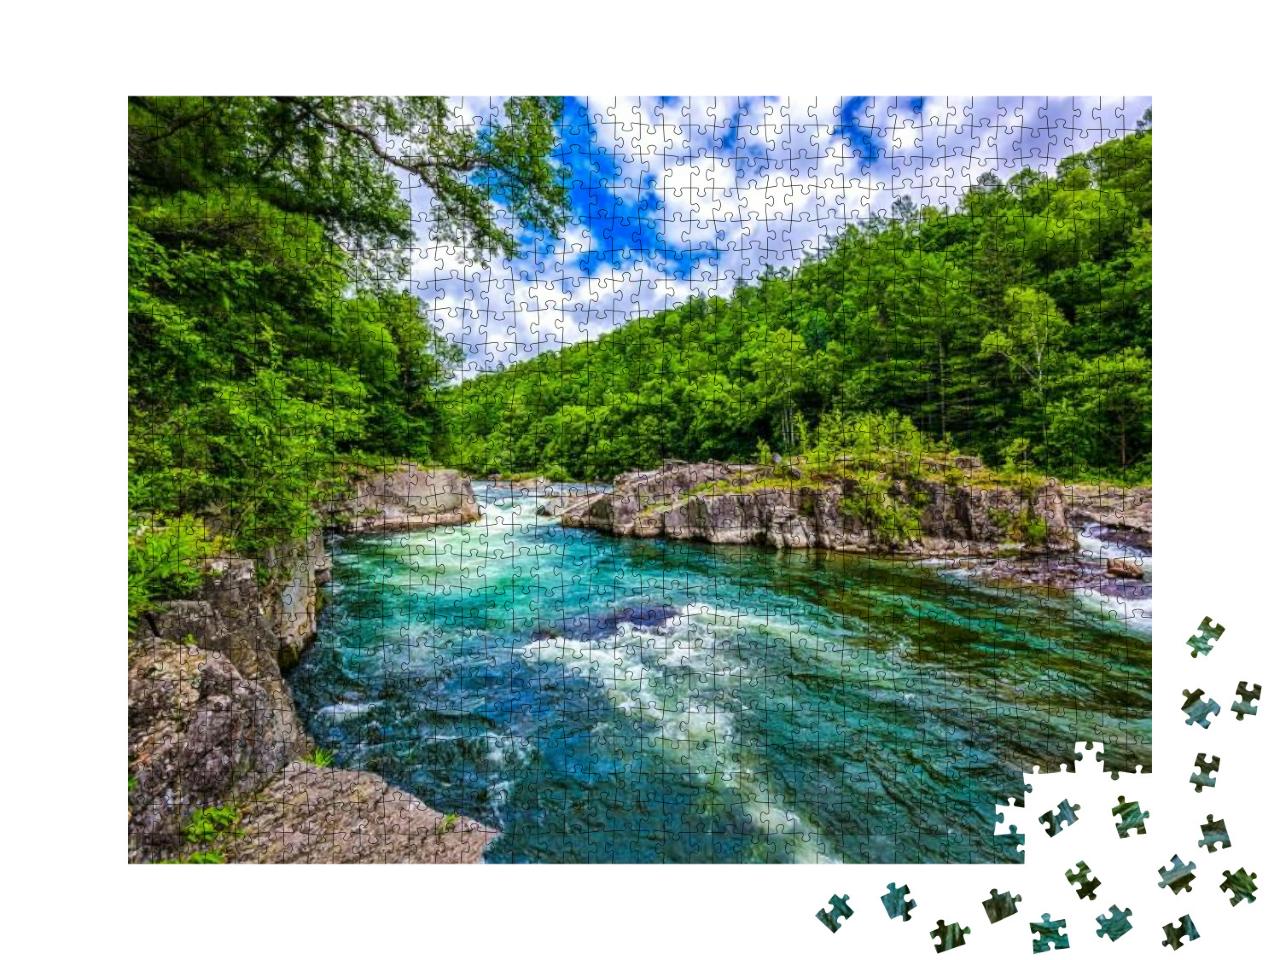 Clean Water in Spring Forest River Landscape... Jigsaw Puzzle with 1000 pieces